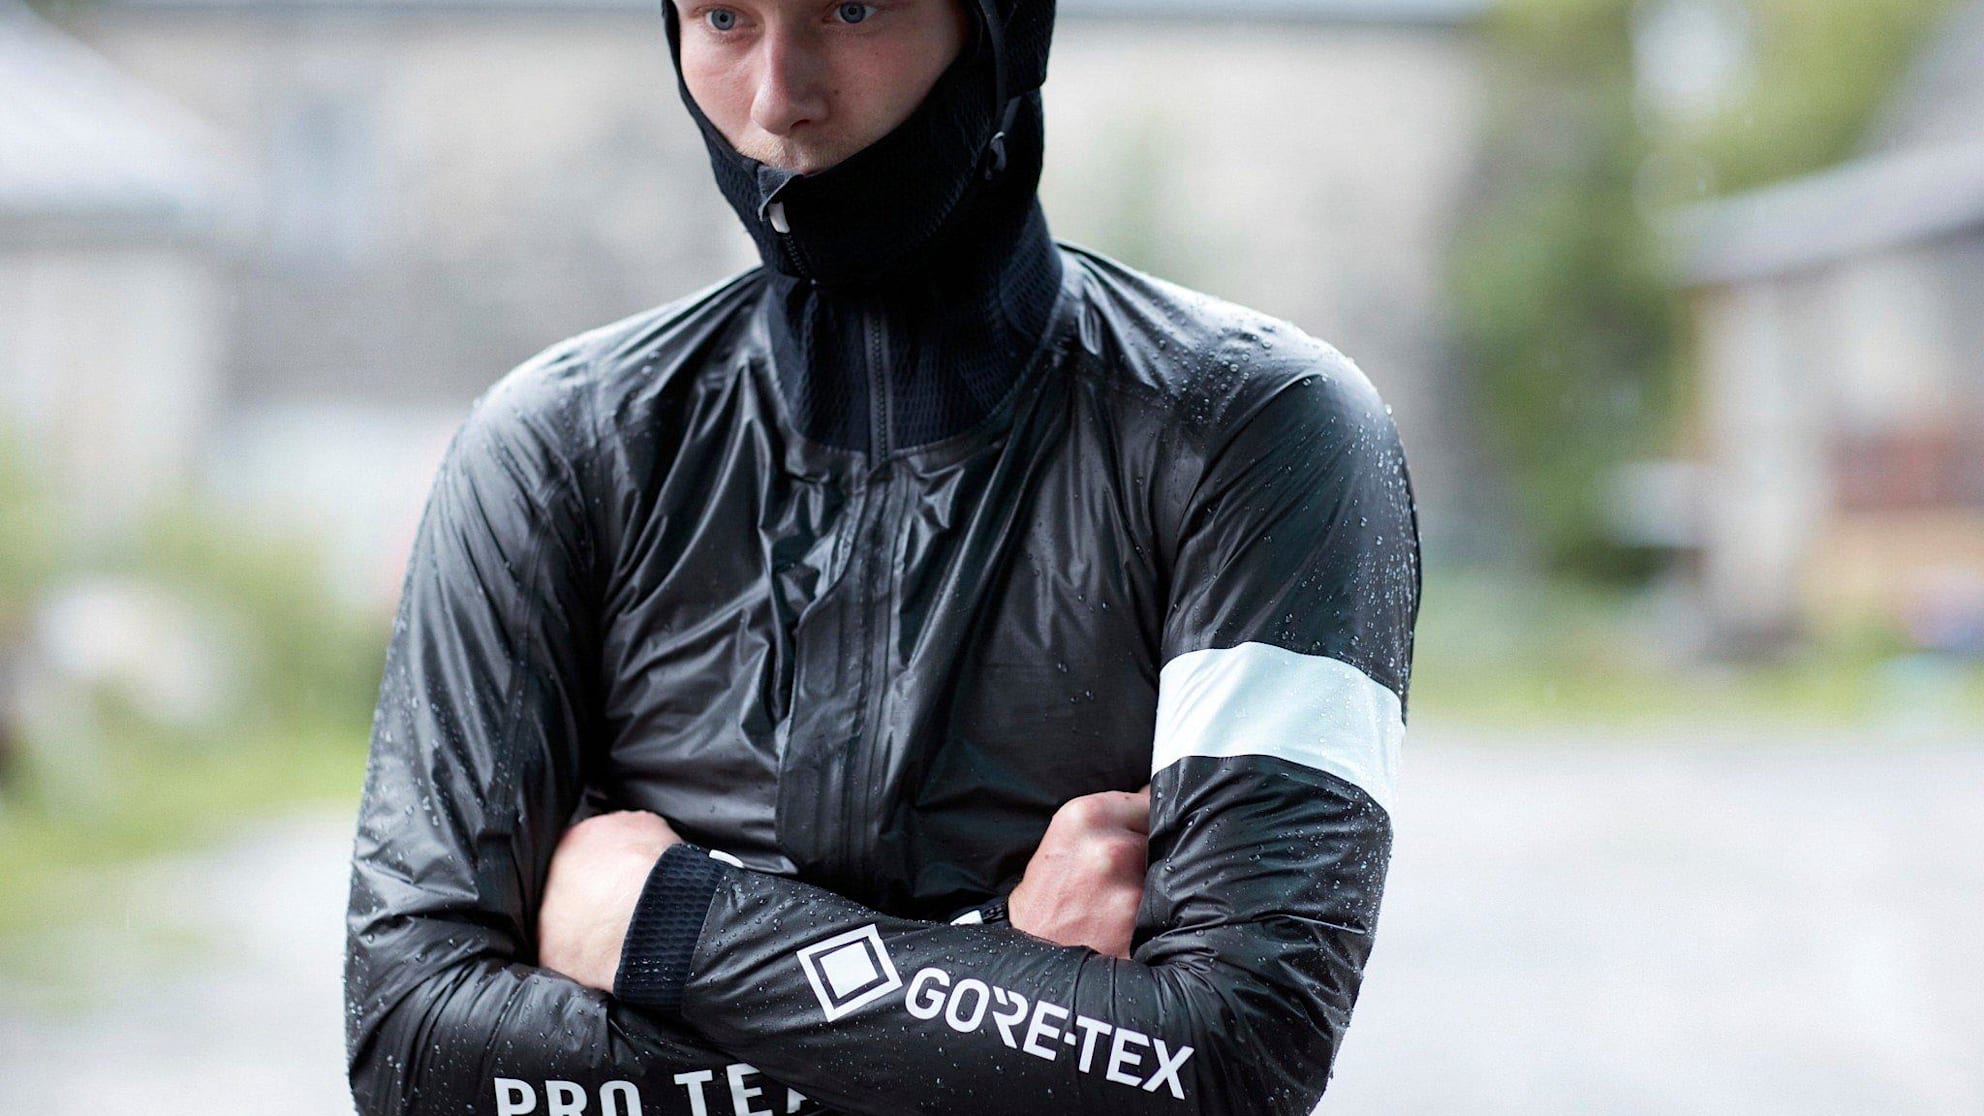 Men's Pro Team Insulated Gore-TEX Cycling Jacket | Rapha